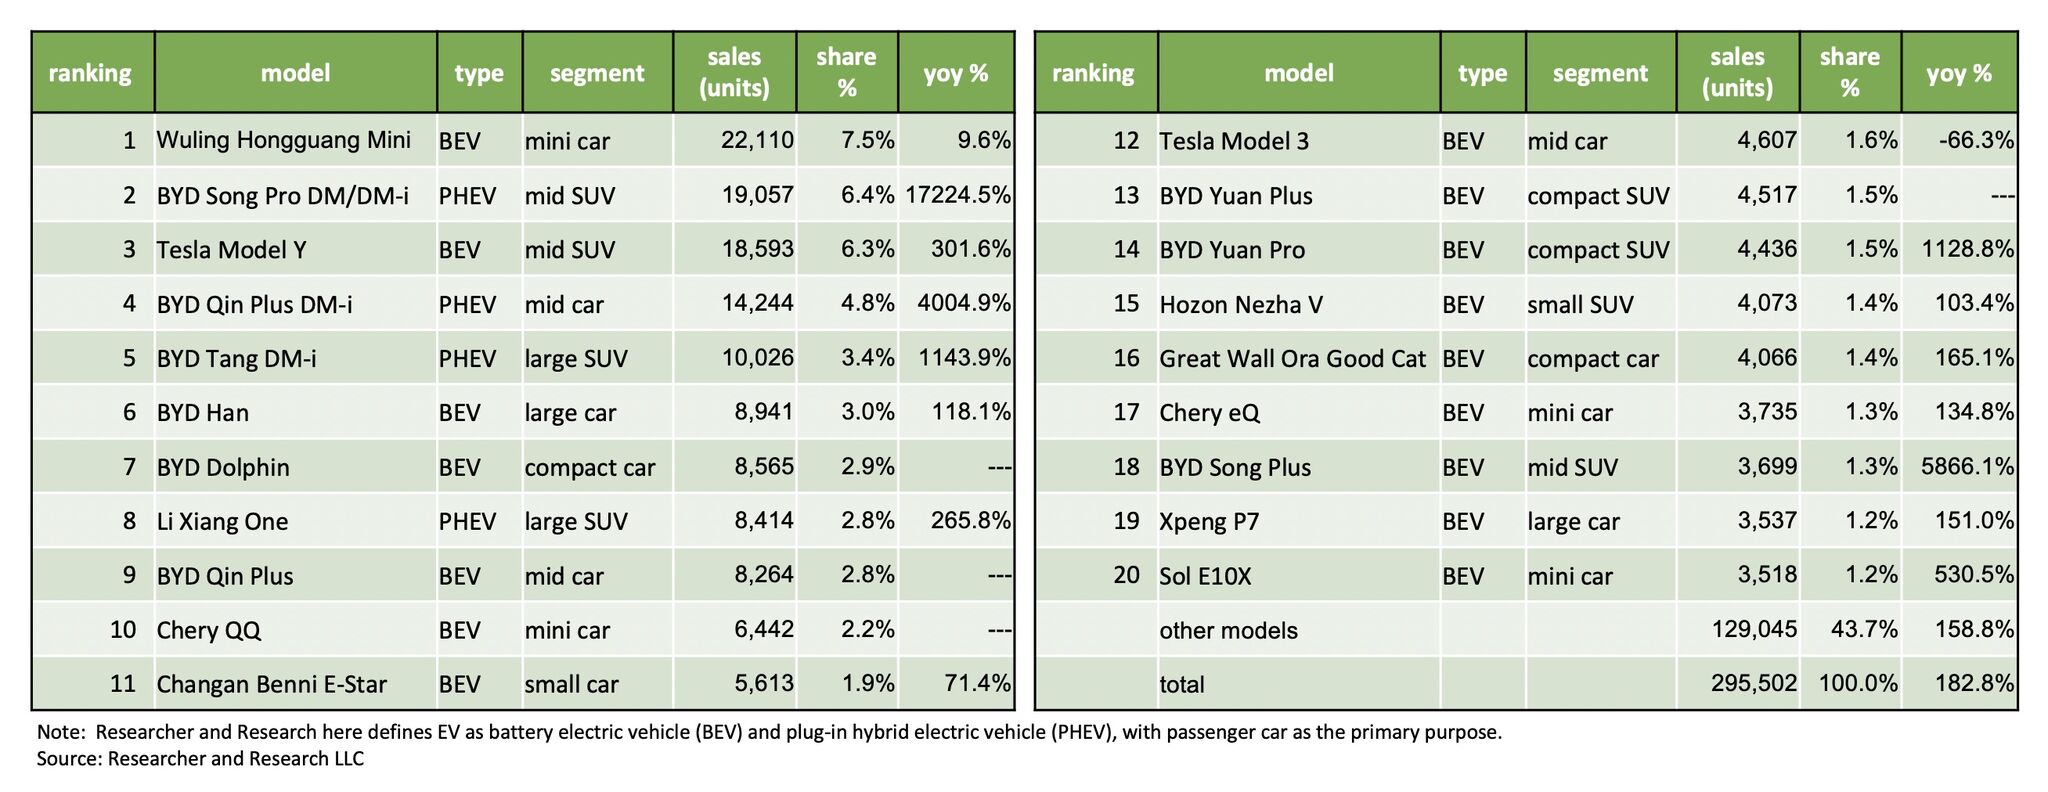 https://e-vehicleinfo.com/chinas-electric-vehicle-sales-in-february-2021-highlights/